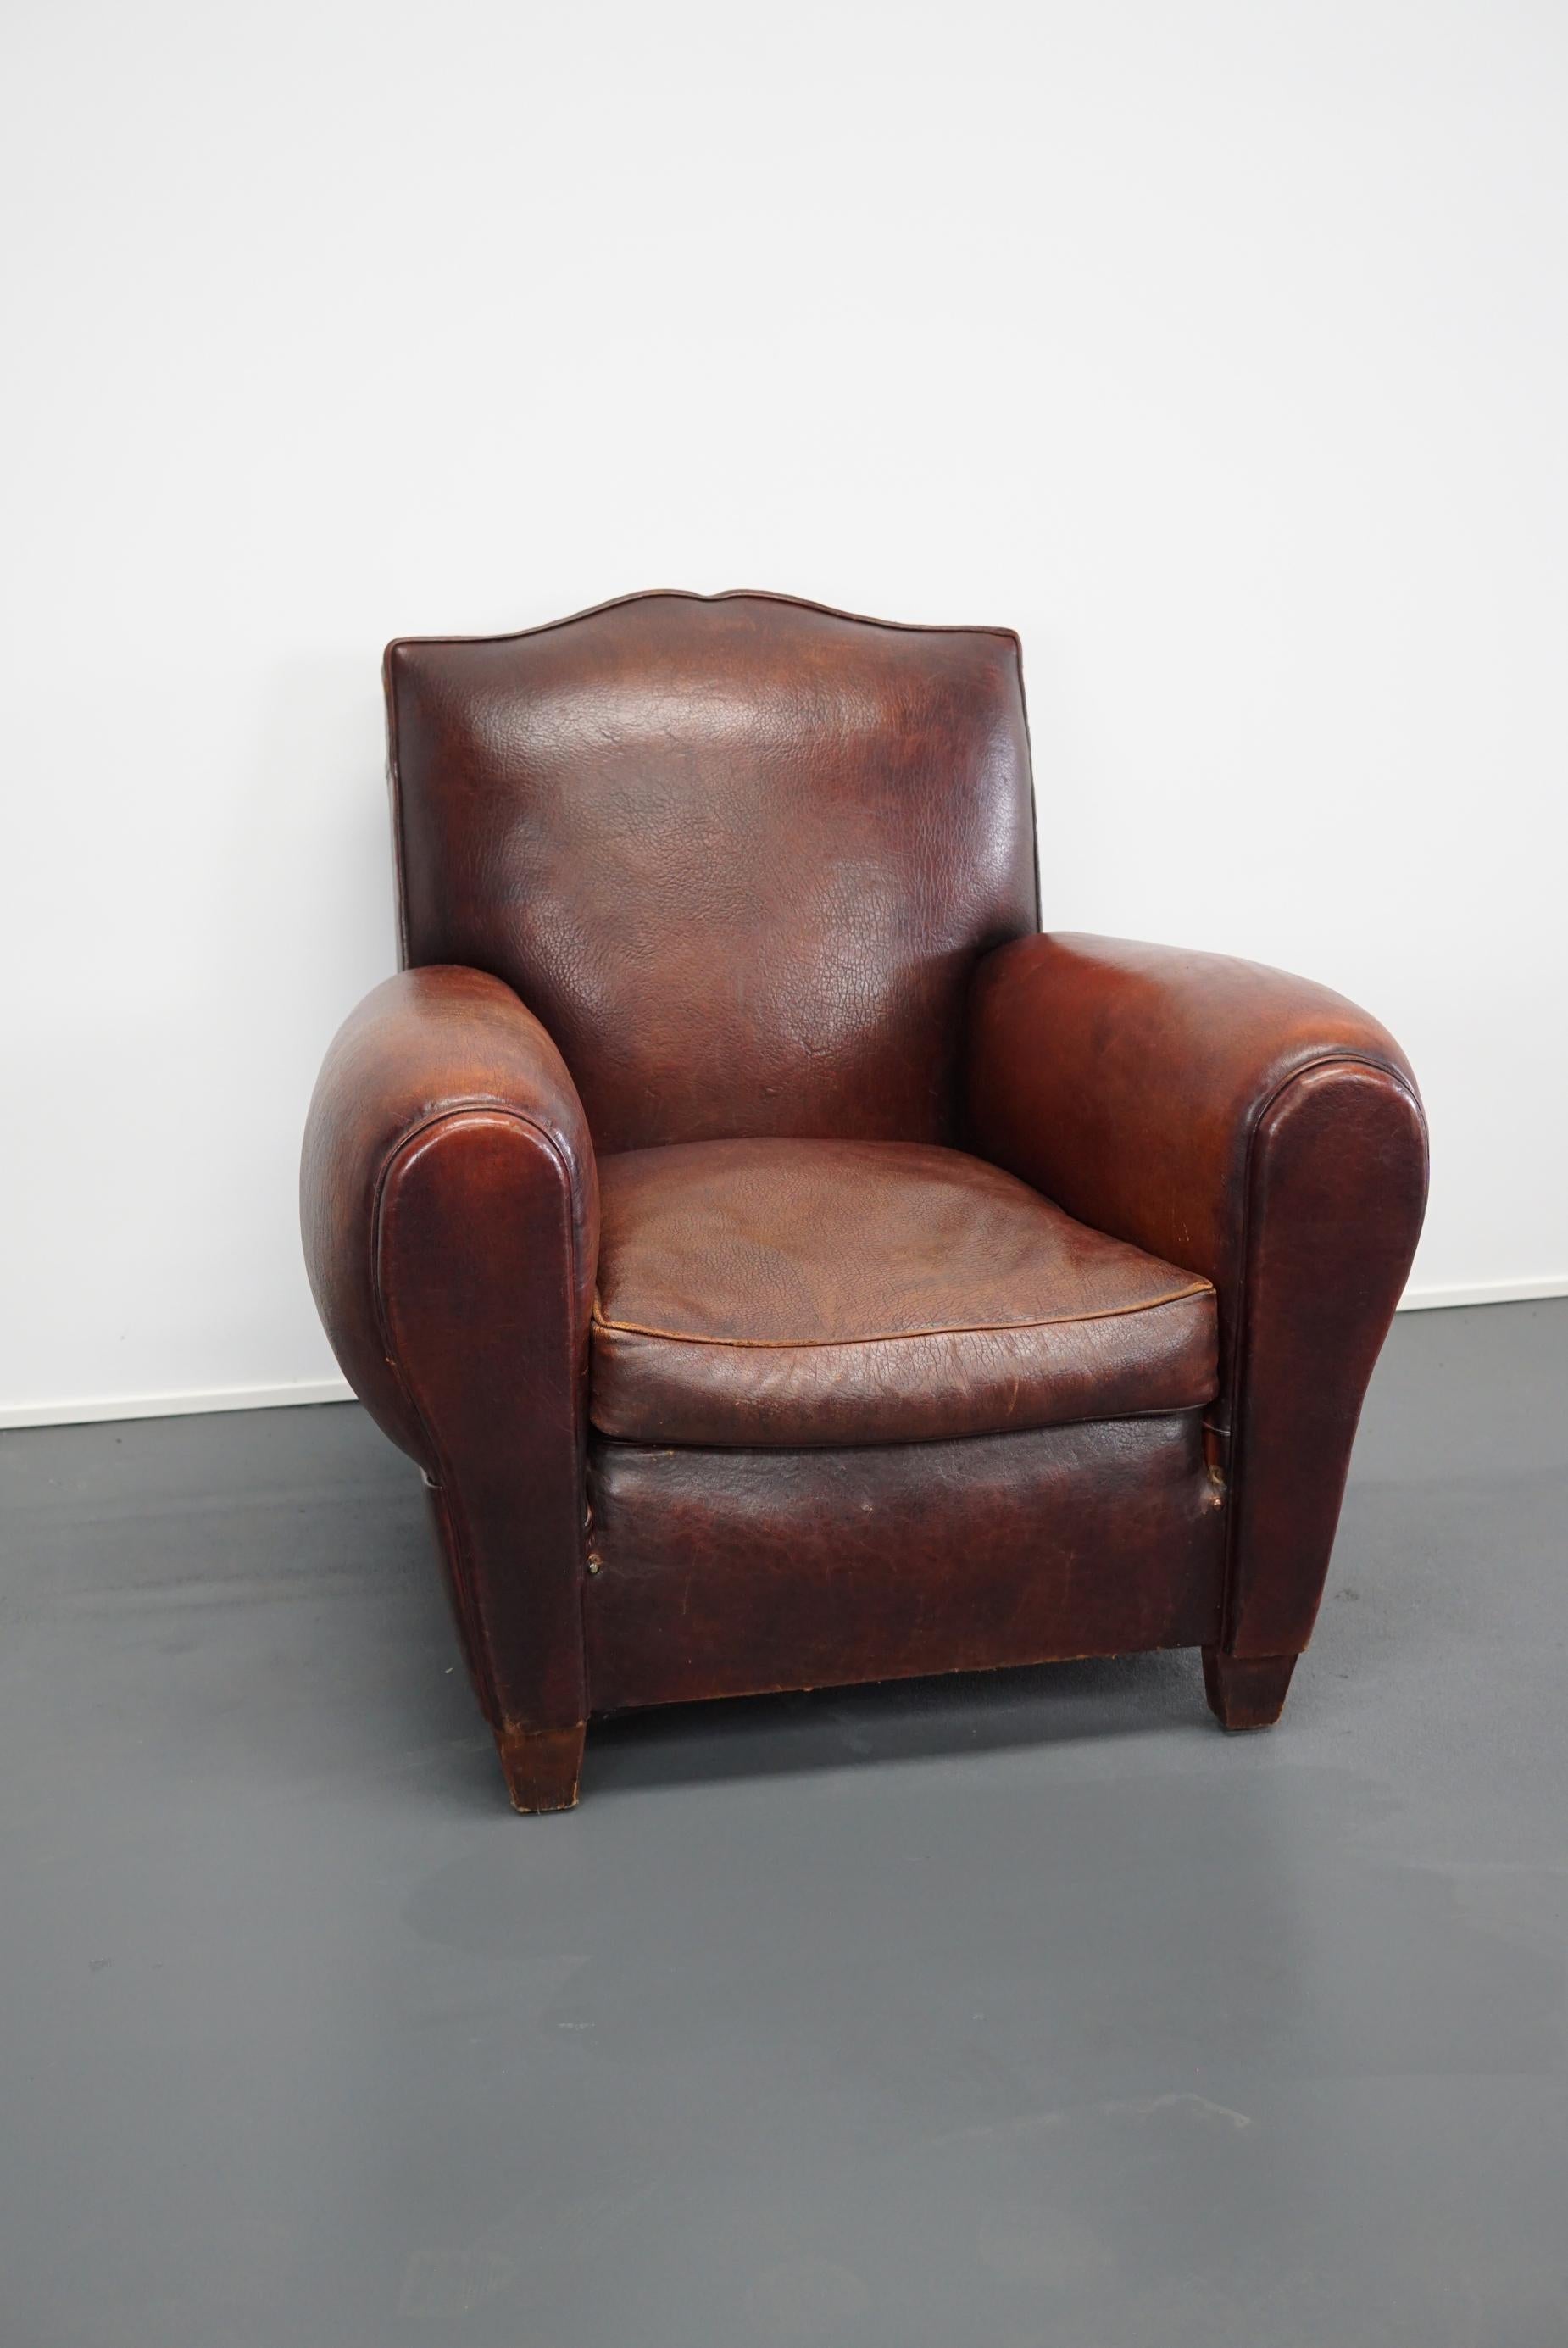 This moustache back French leather club chair was designed and made in France. It is in an amazing condition for it's age. The thick buffalo hide upholstery makes it stand out.